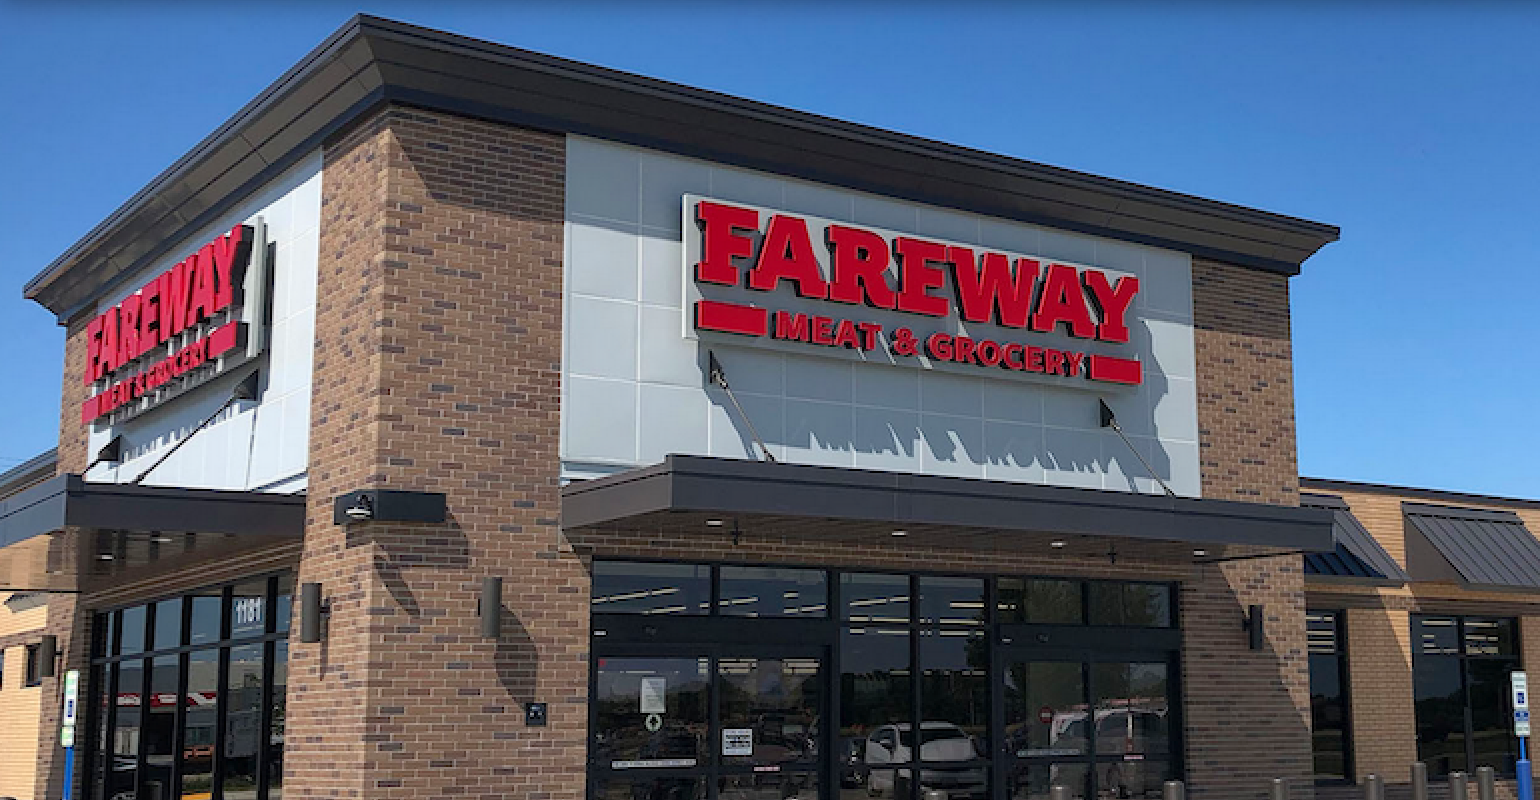 Bitcoin Depot Set to Deploy Over 60 ATMs to Fareway